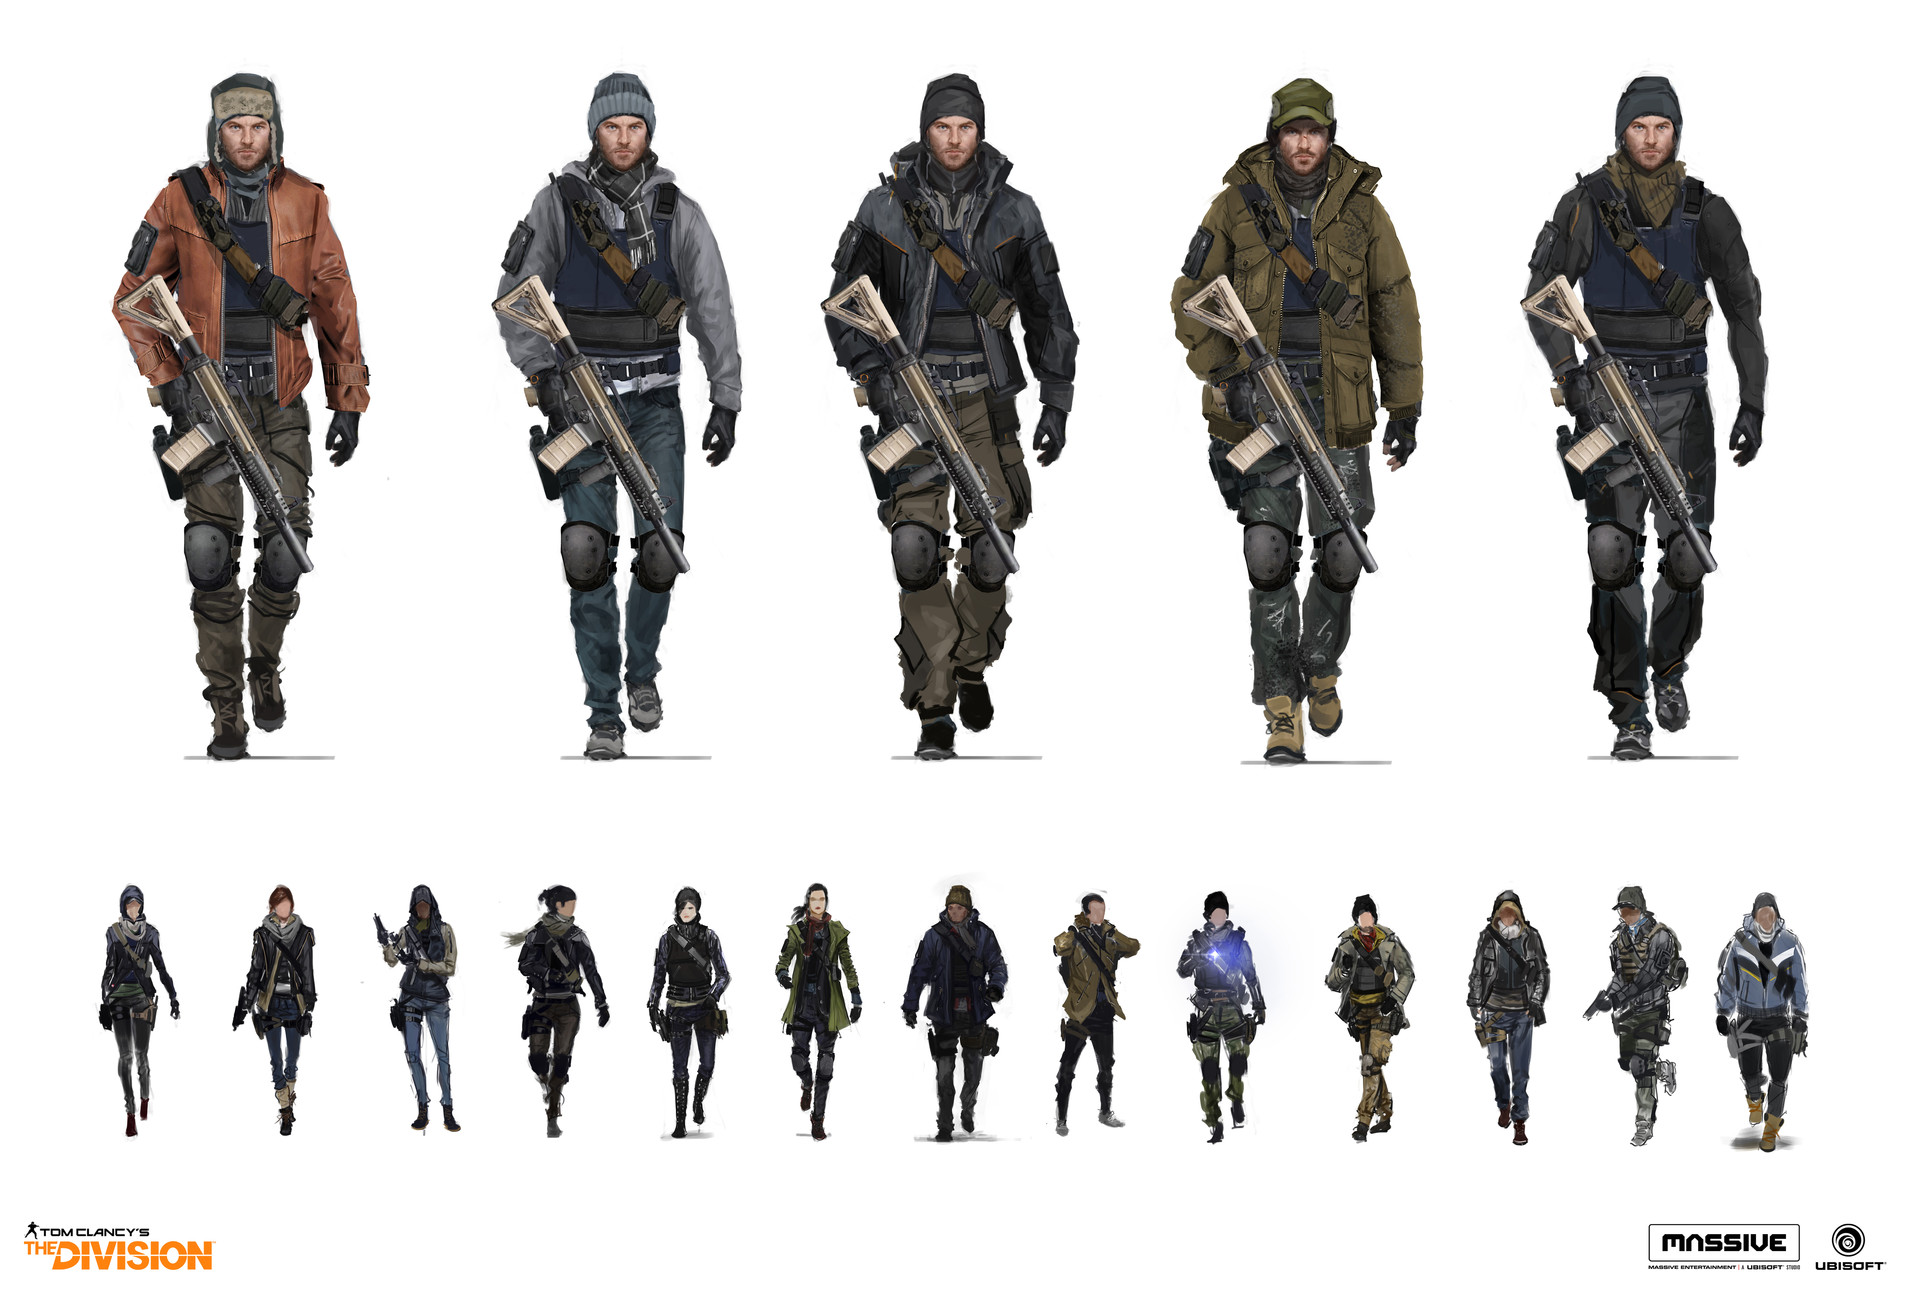 Fine Art: The Division Dressed Very Sensibly